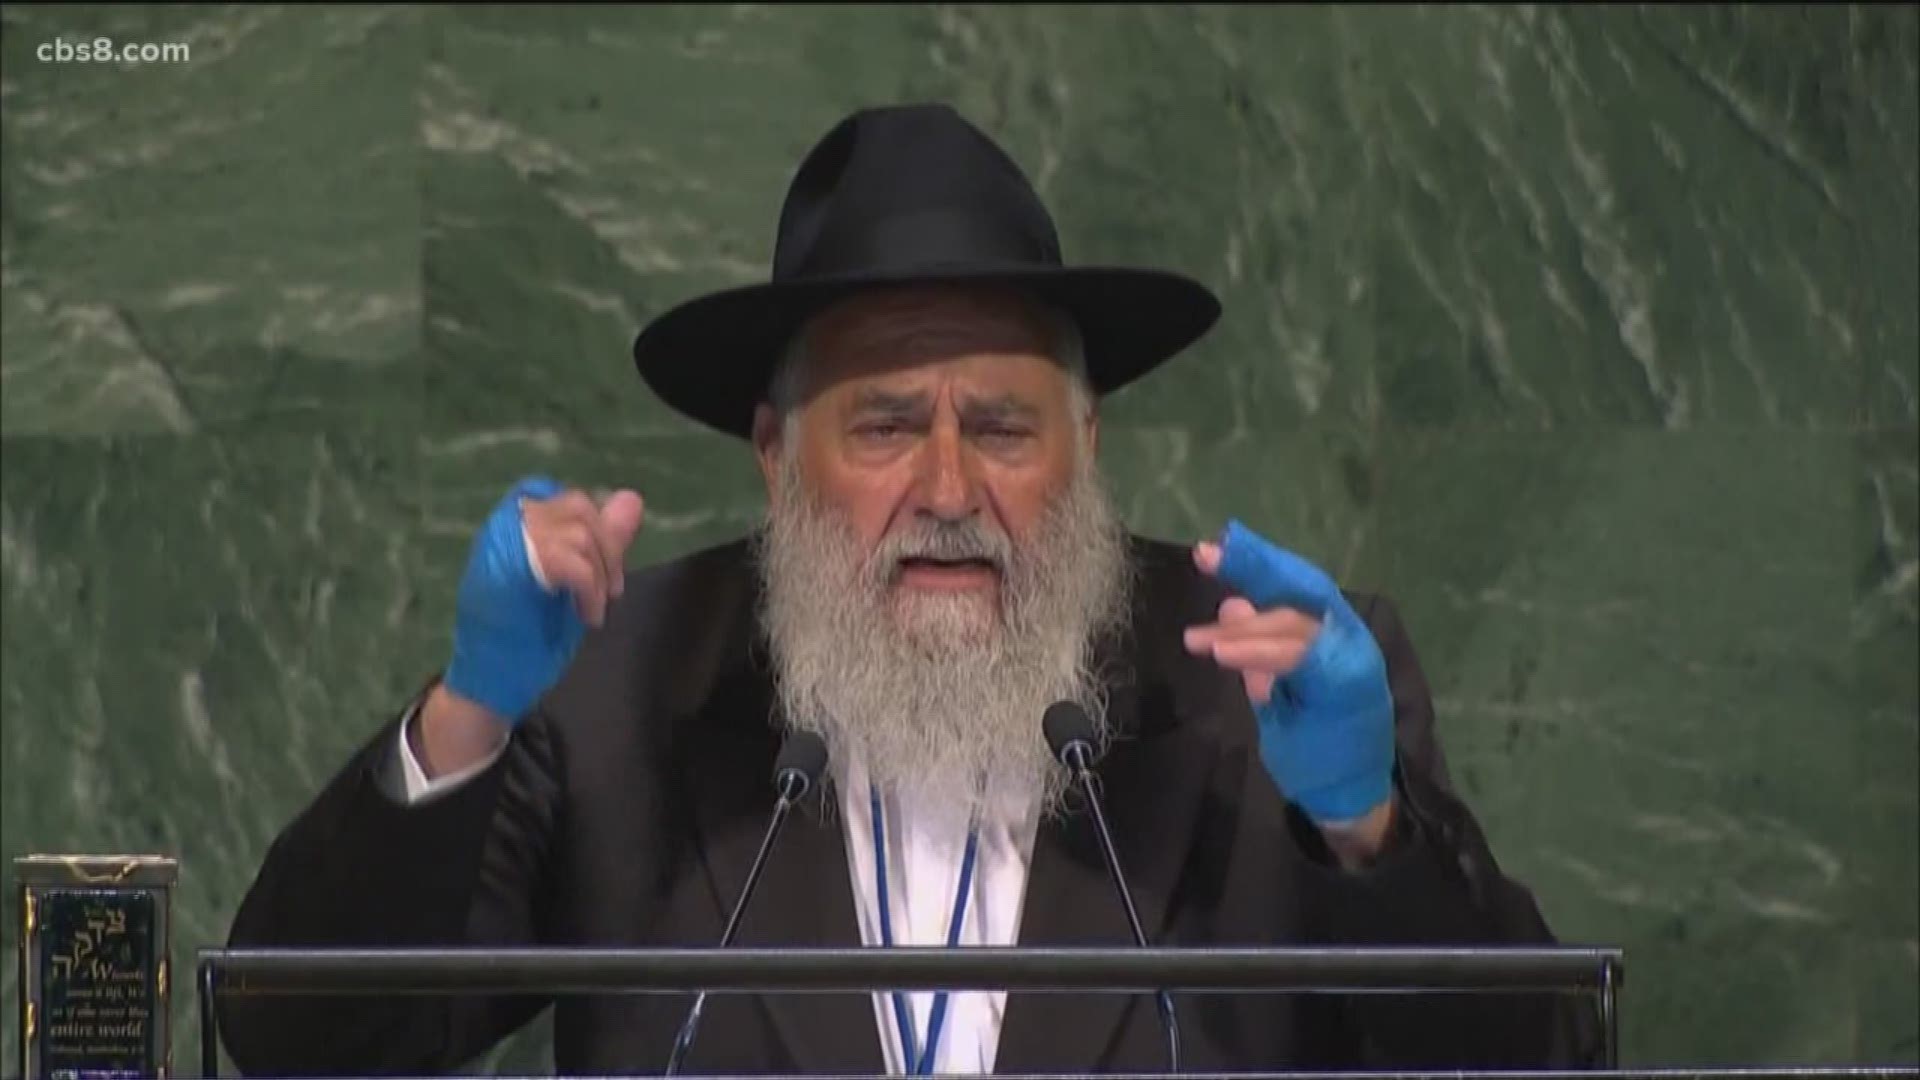 Rabbi Goldstein lost his right index finger during the April 27 shooting, during which one woman died and three others were injured.